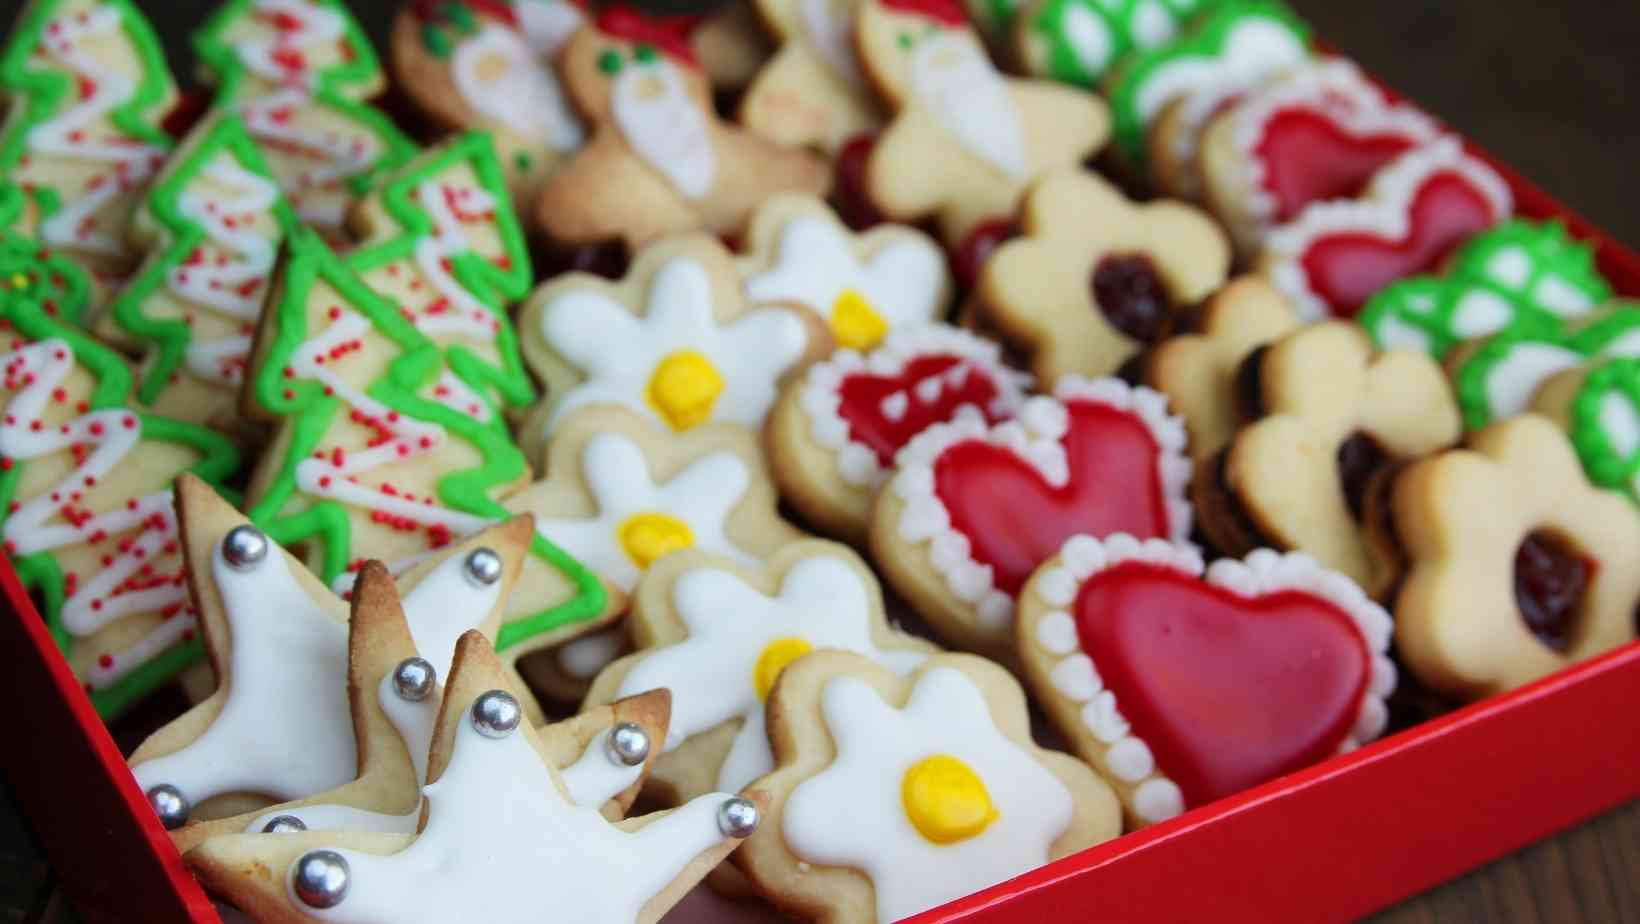 Yummy Christmas Cookies Recipes